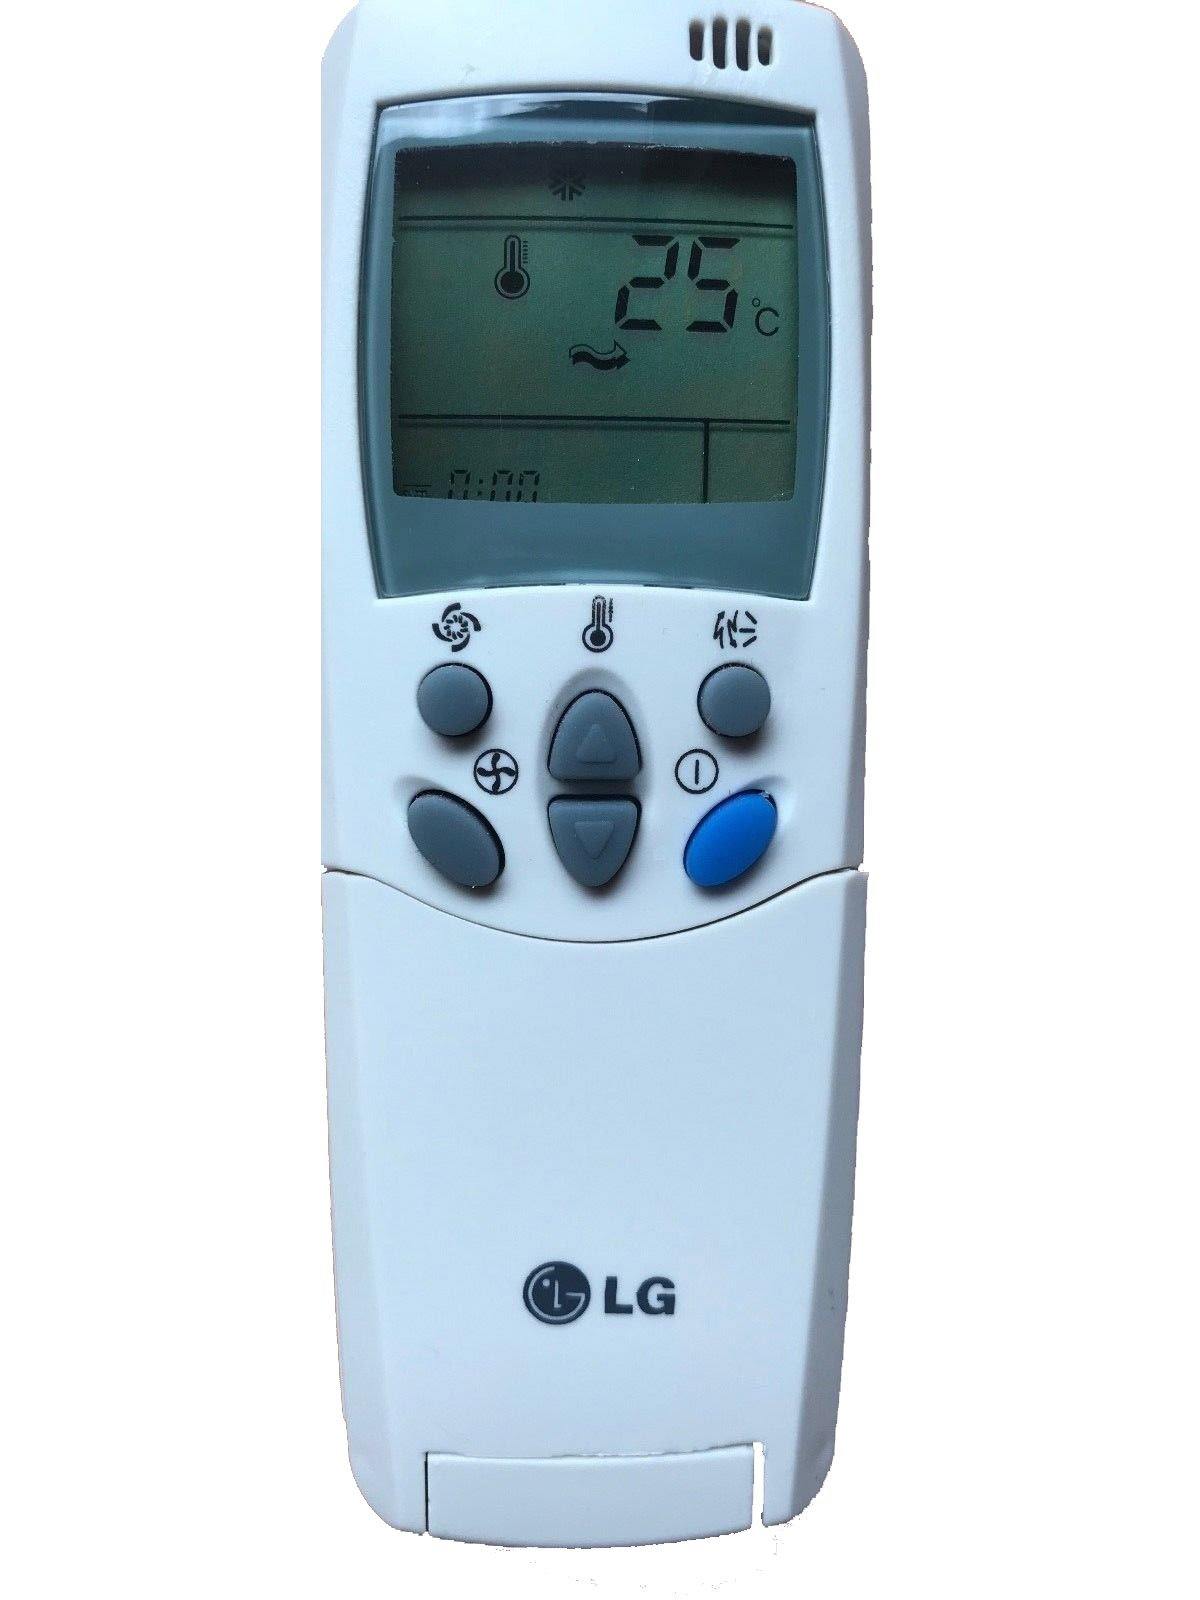 Replacement AC Remote for LG -Model:  LS-K2463H - China Air Conditioner Remotes :: Cheapest AC Remote Solutions